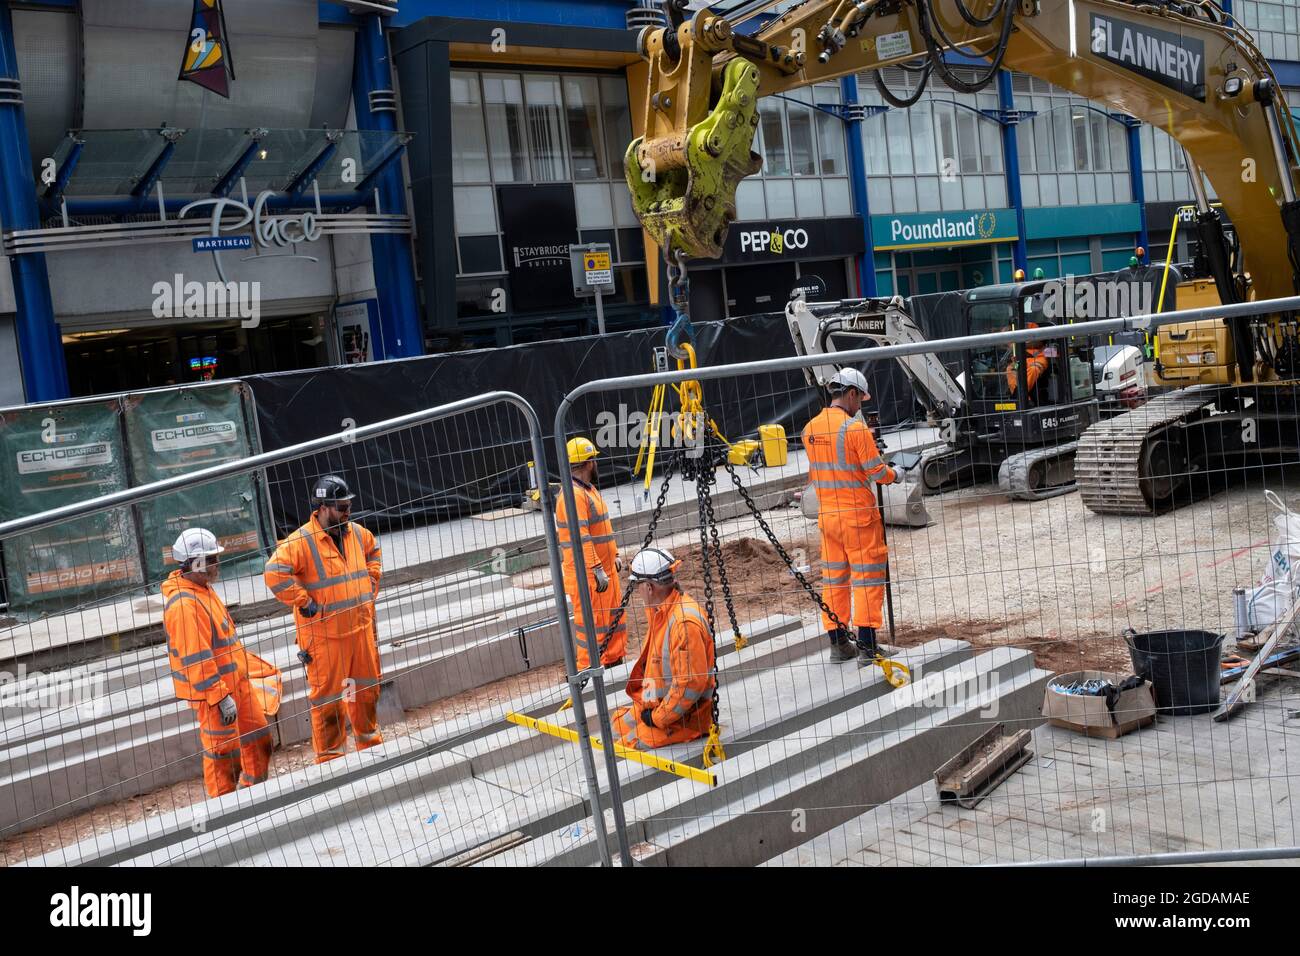 Team of workmen wearing orange high-viz overalls on a construction site work at laying the new track foundations for the update to the Midland Metro tram public transport system in the city centre along Corporation Street on 3rd August 2021 in Birmingham, United Kingdom. The original tracks are being pulled up and relaid, while a new line is also under construction and due to open later in the year. The Midland Metro is a light-rail tram line in the county of West Midlands, England, operating between the cities of Birmingham and Wolverhampton via the towns of West Bromwich and Wednesbury. The Stock Photo